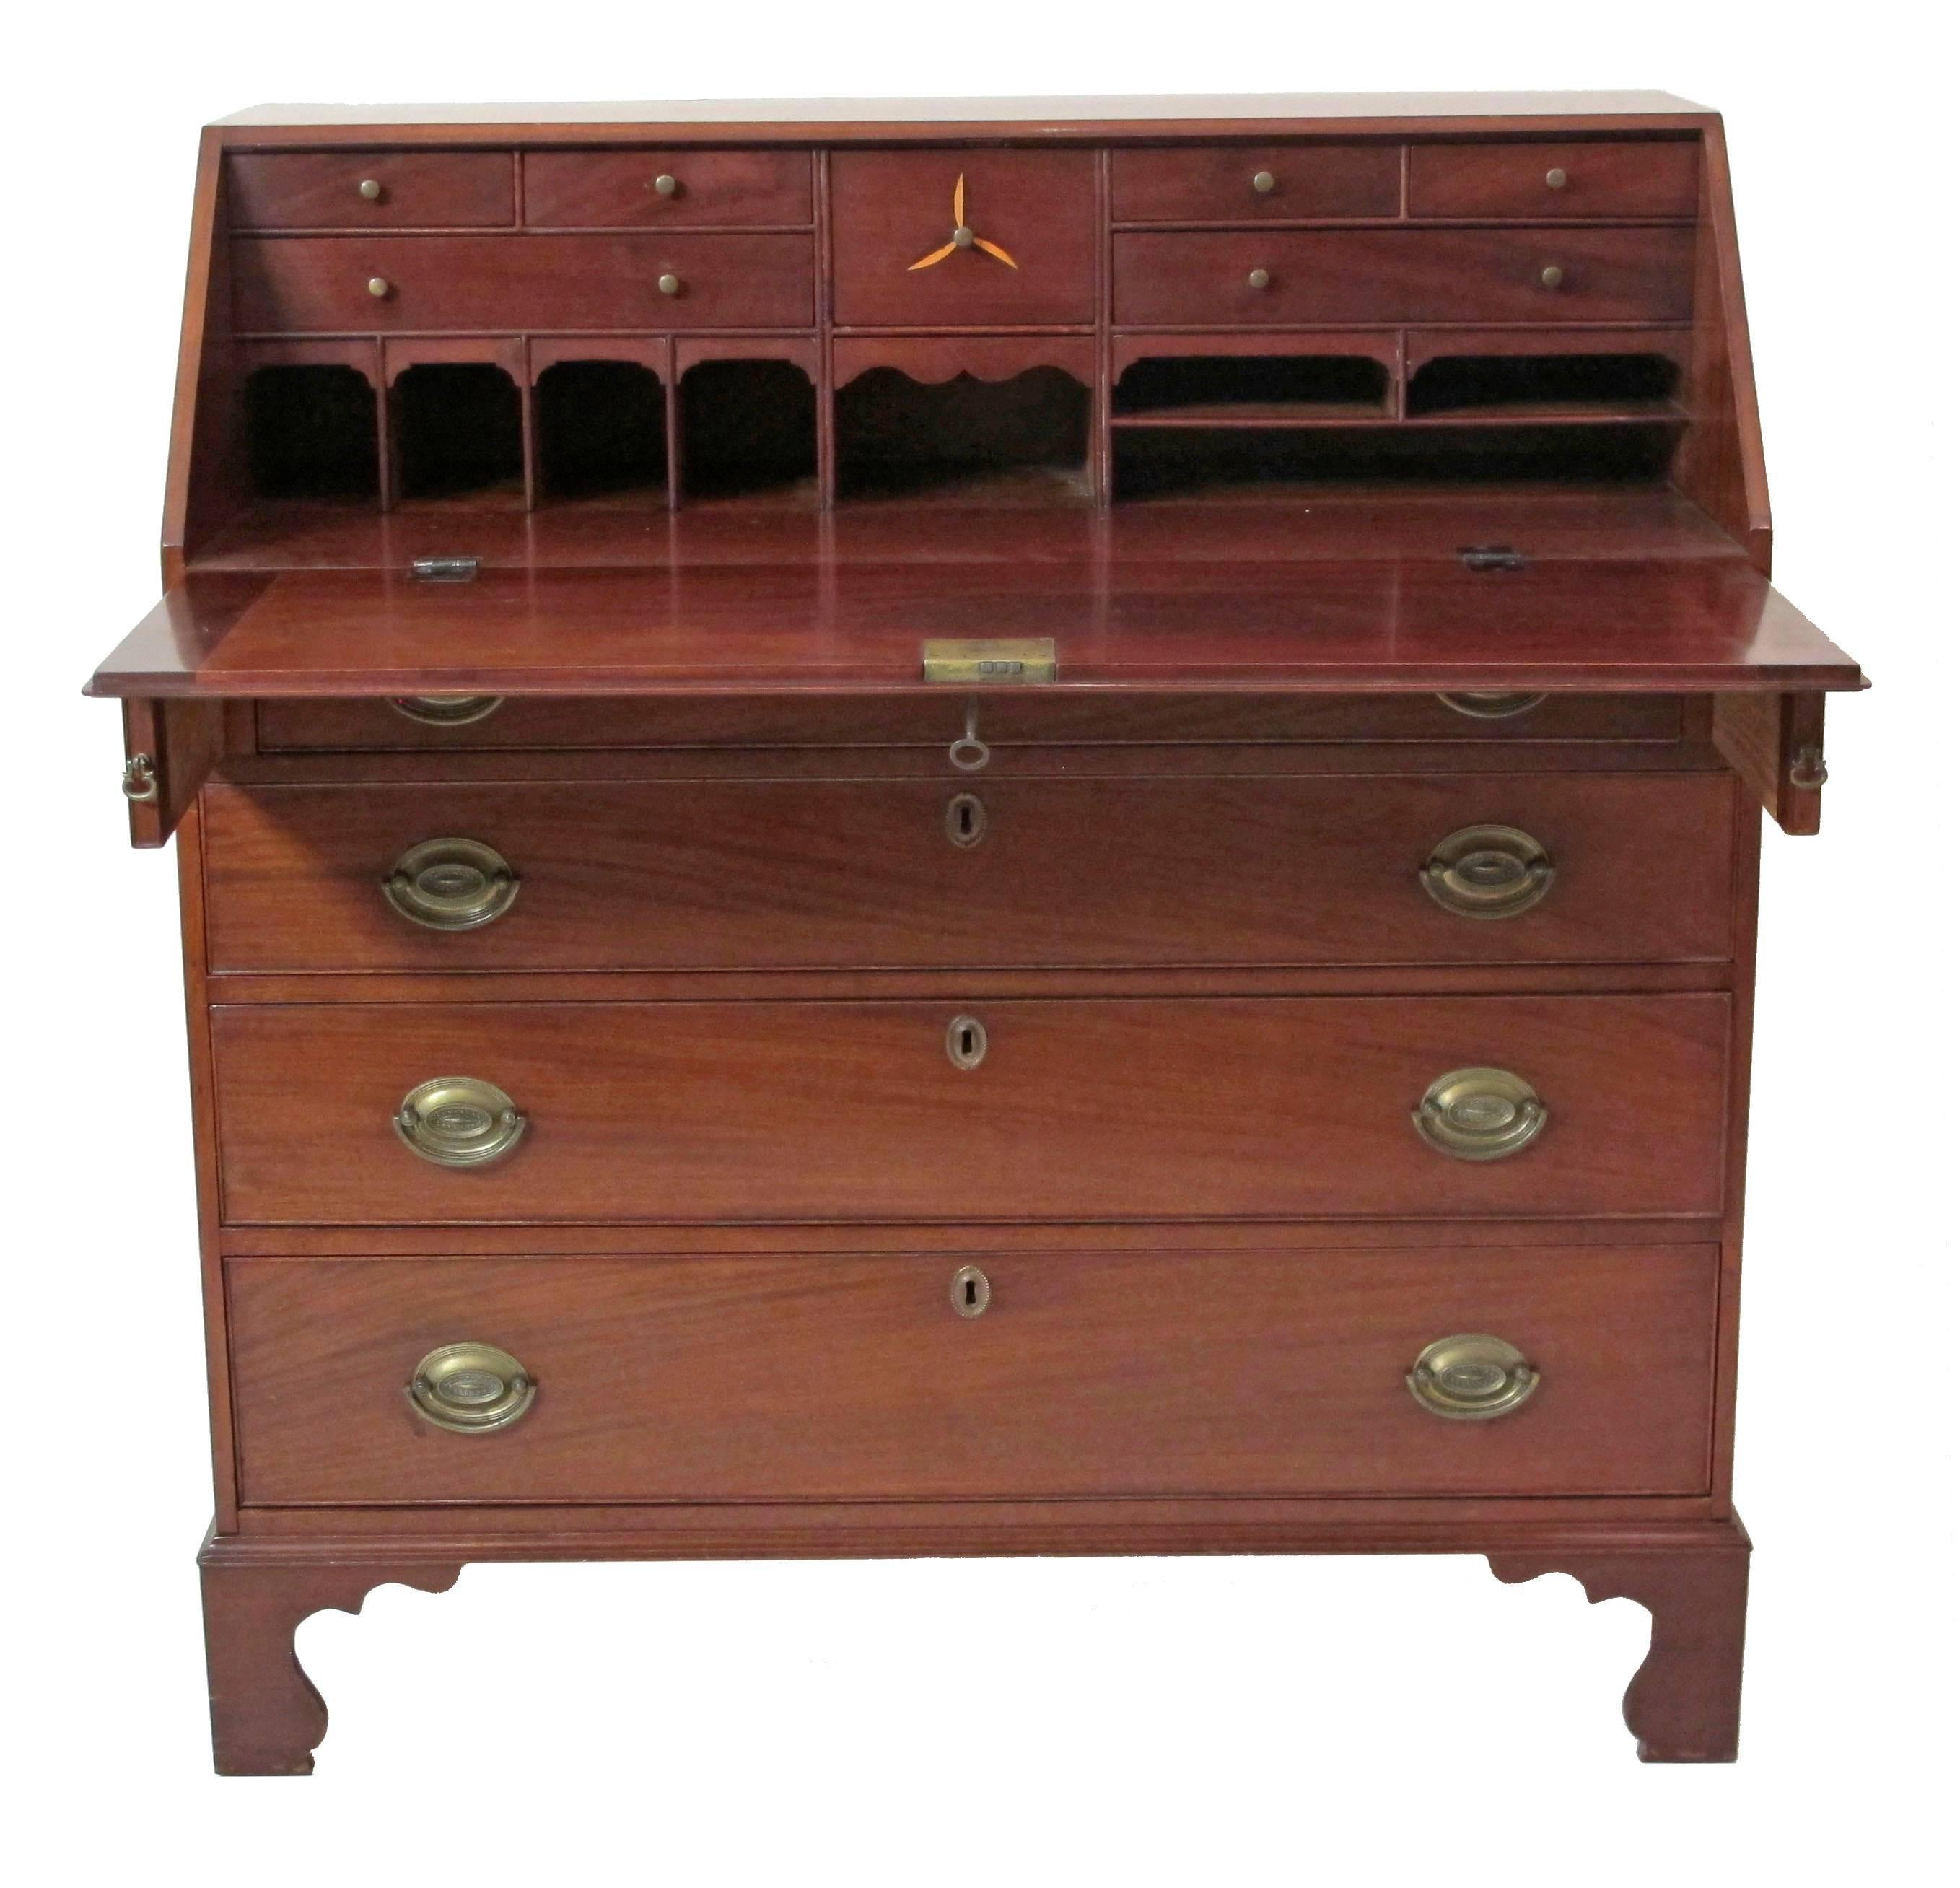 Georgian Mahogany fall front desk with fitted interior of nine small drawers and seven pigeon holes, the top supported on two slide out supports above four graduated drawers and brass pulls, standing on shaped bracket feet.  English, Circa 1800.
